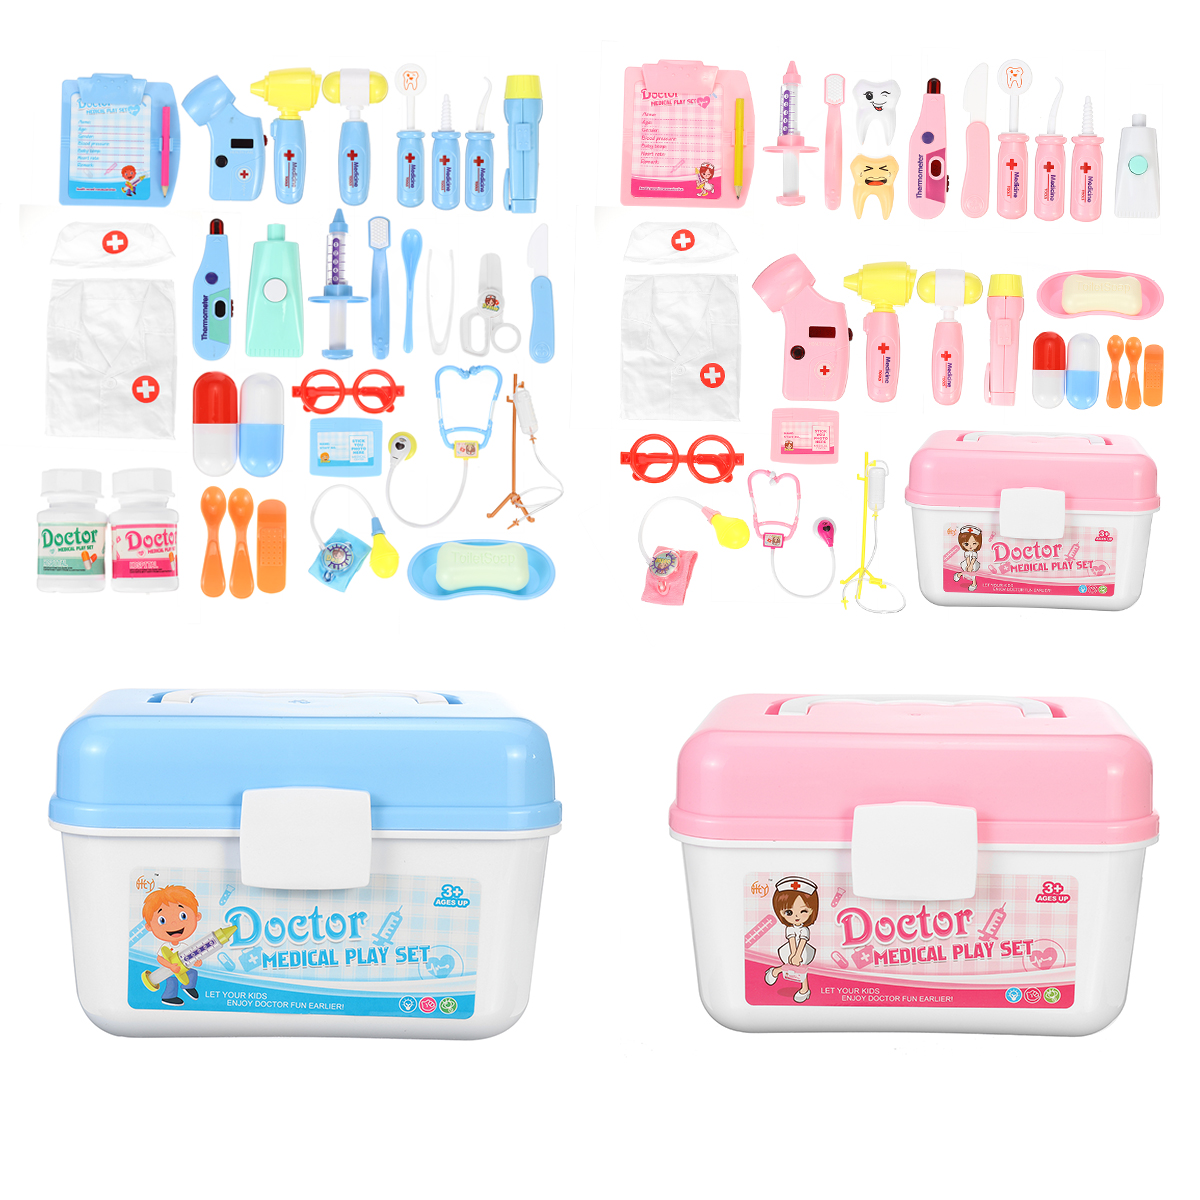 35-Pcs-Simulation-Medical-Role-Play-Pretend-Doctor-Game-Equipment-Set-Educational-Toy-with-Box-for-K-1730581-1